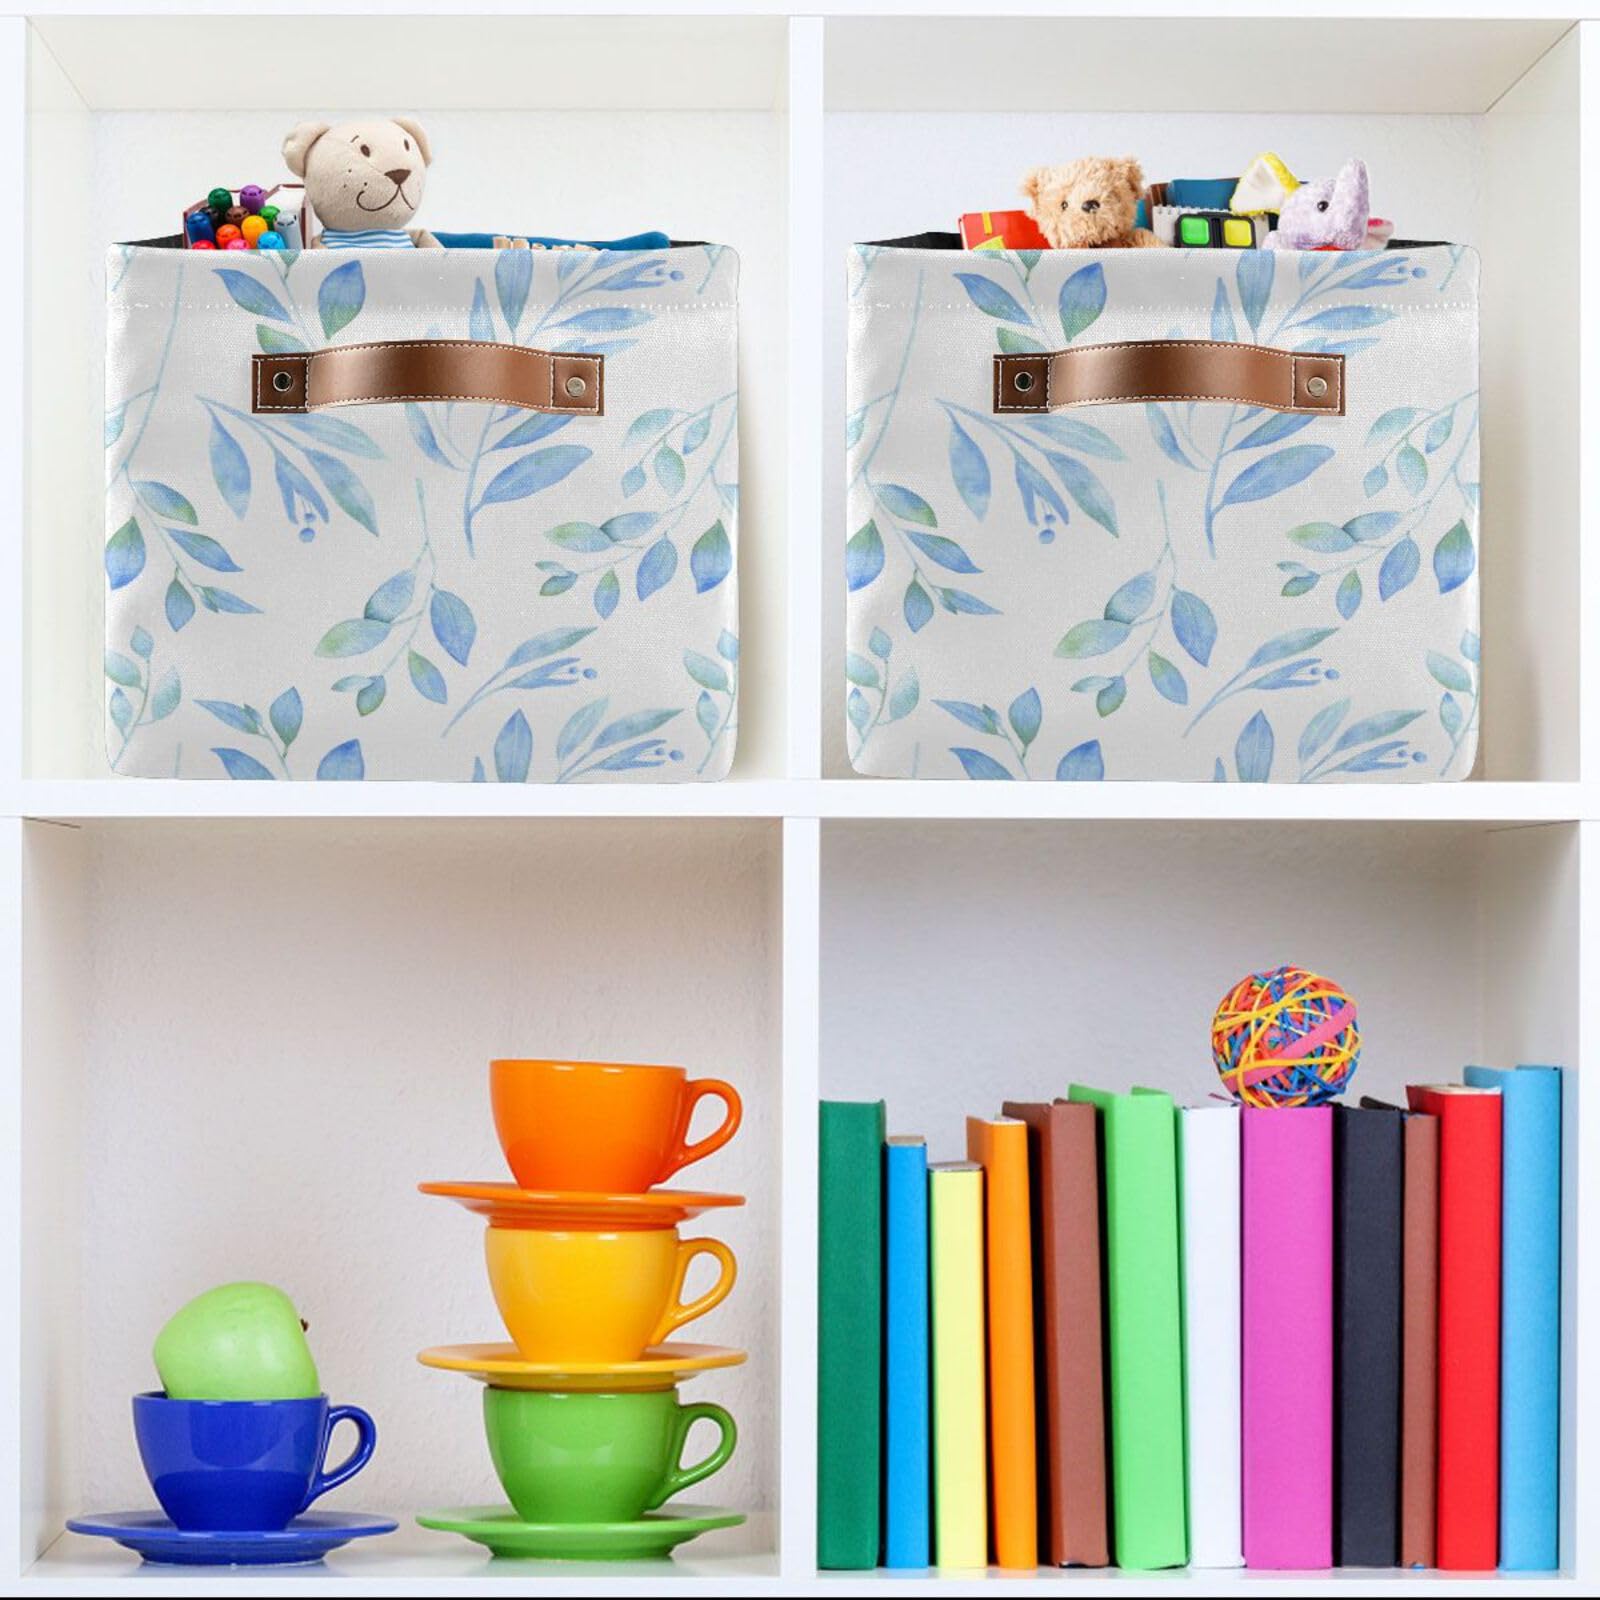 SDMKA Fabric Storage Baskets Blue Branch Foldable Baskets Large Storage Bins for Organizing Shelves Closet Home, Decorate Your Rooms